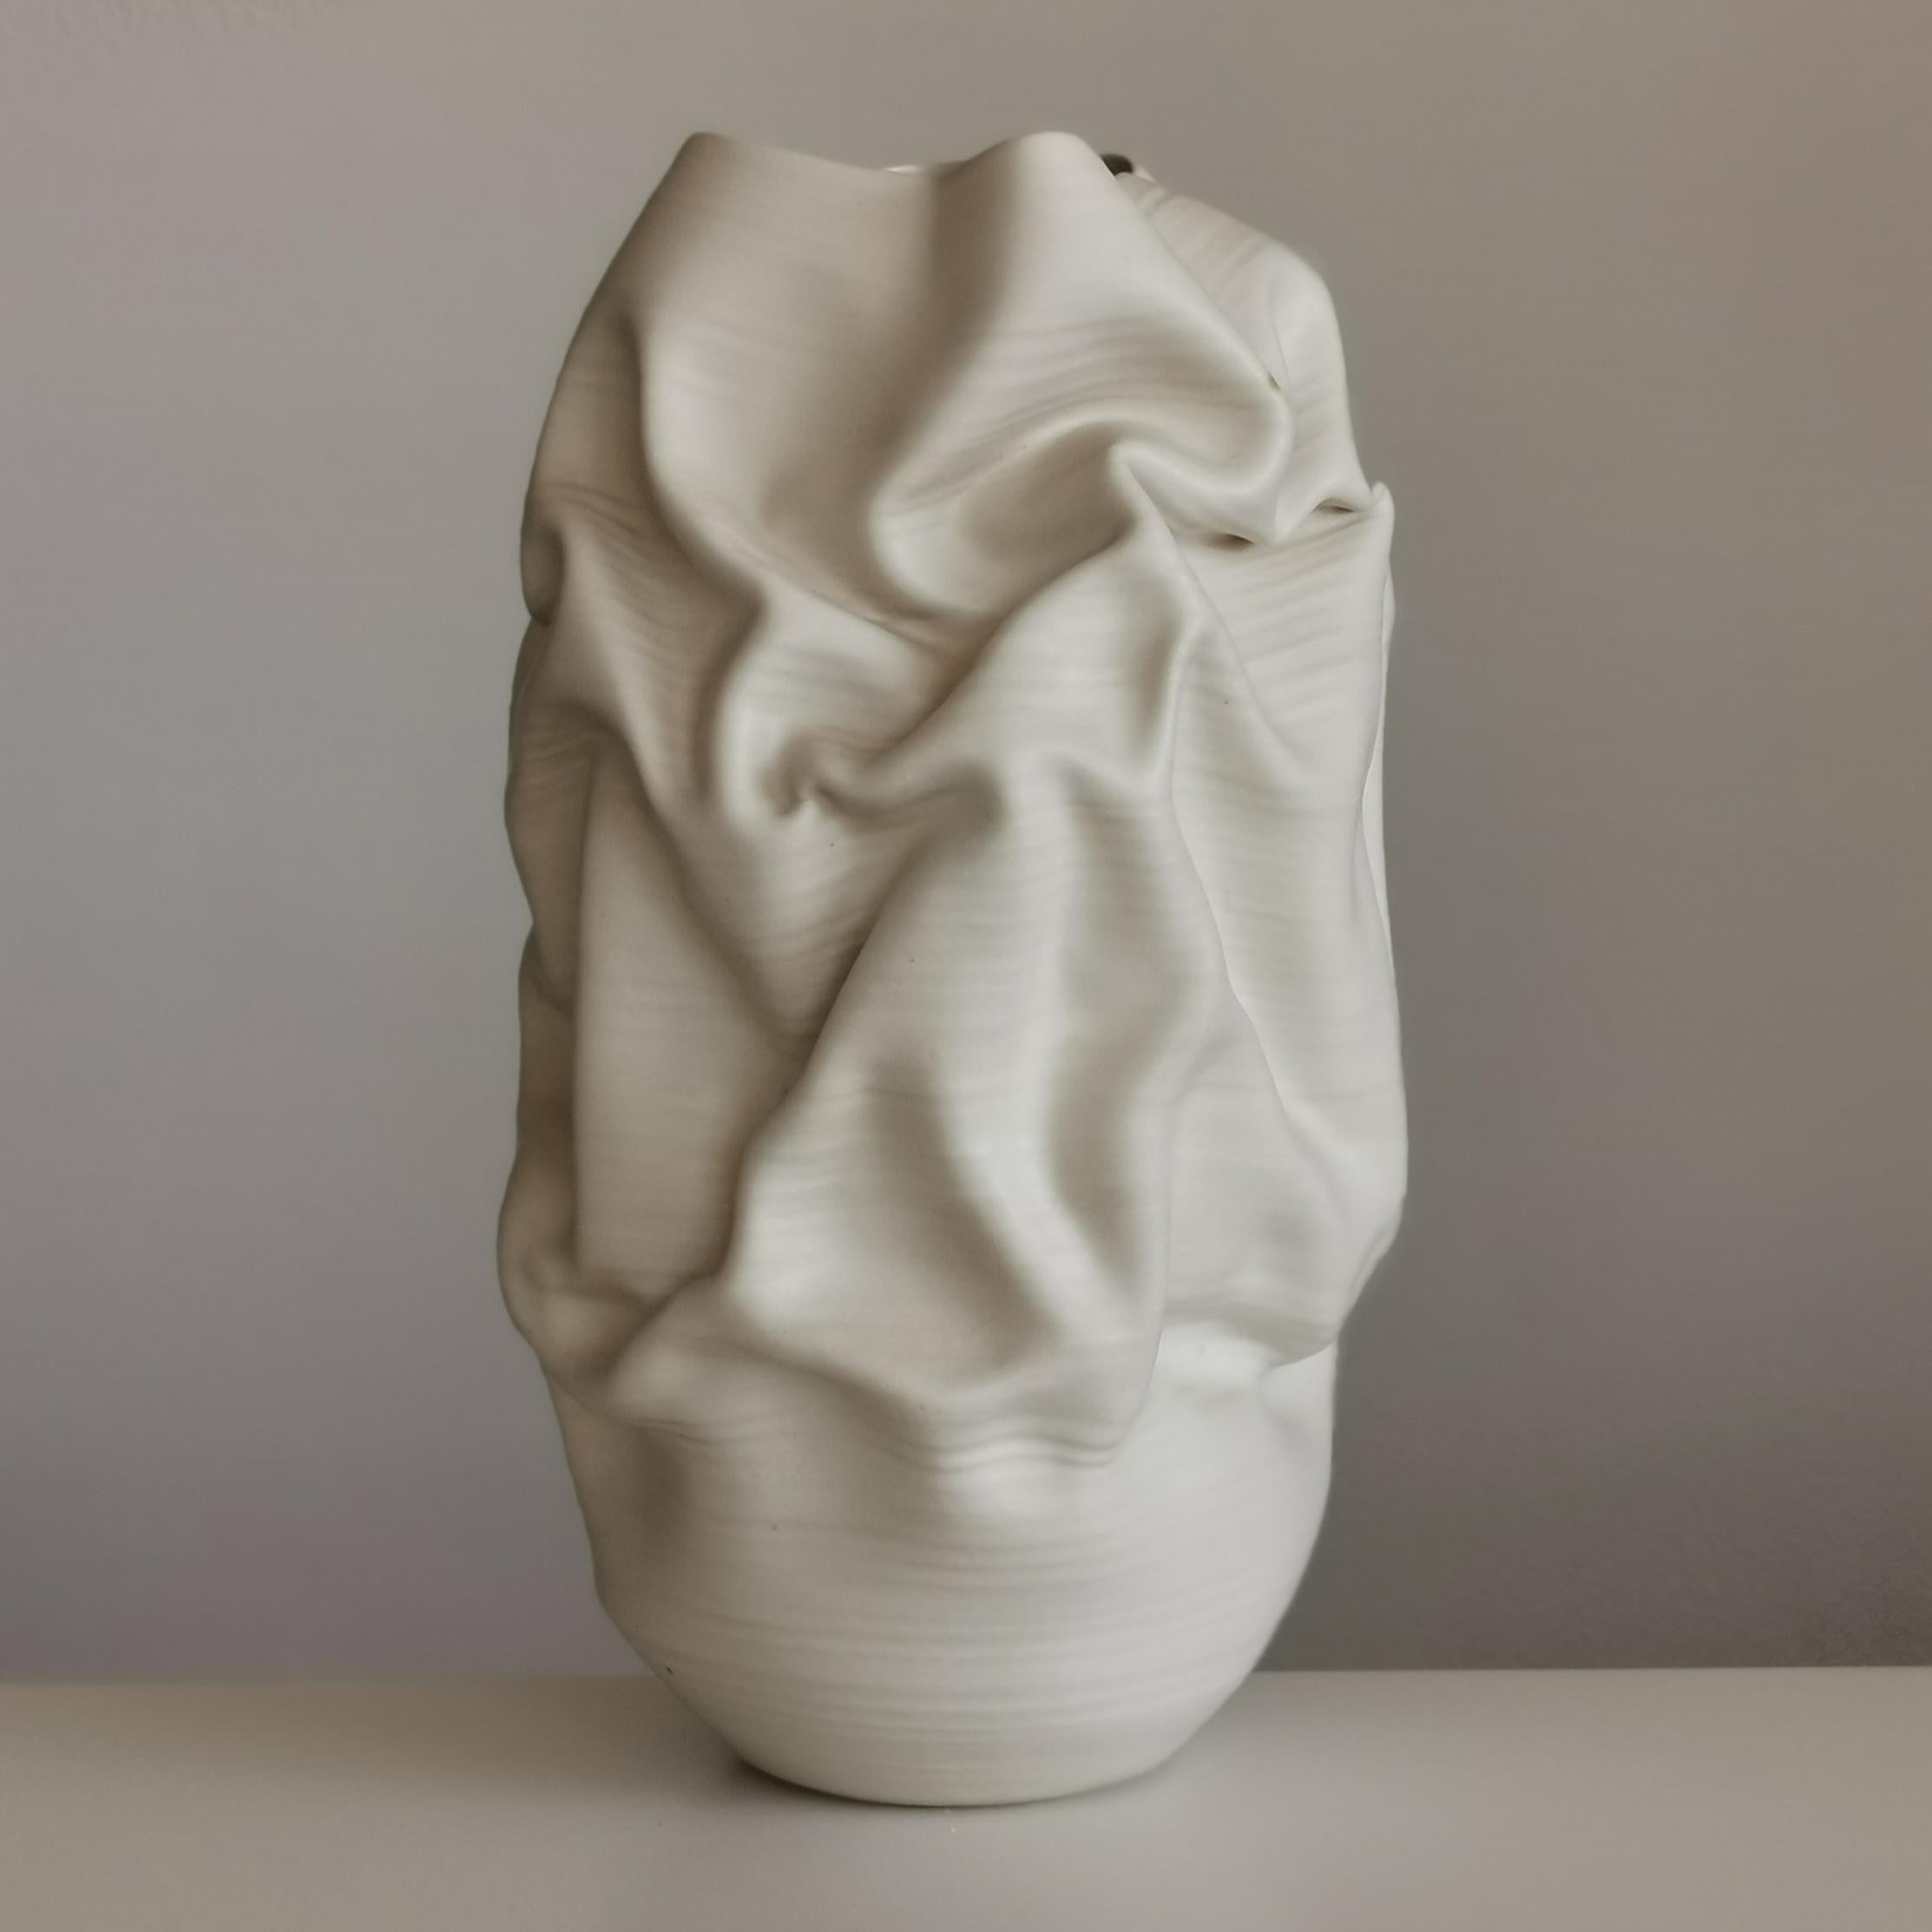 Hand-Crafted Tall White Crumpled Form No 31, Ceramic Vessel by Nicholas Arroyave-Portela